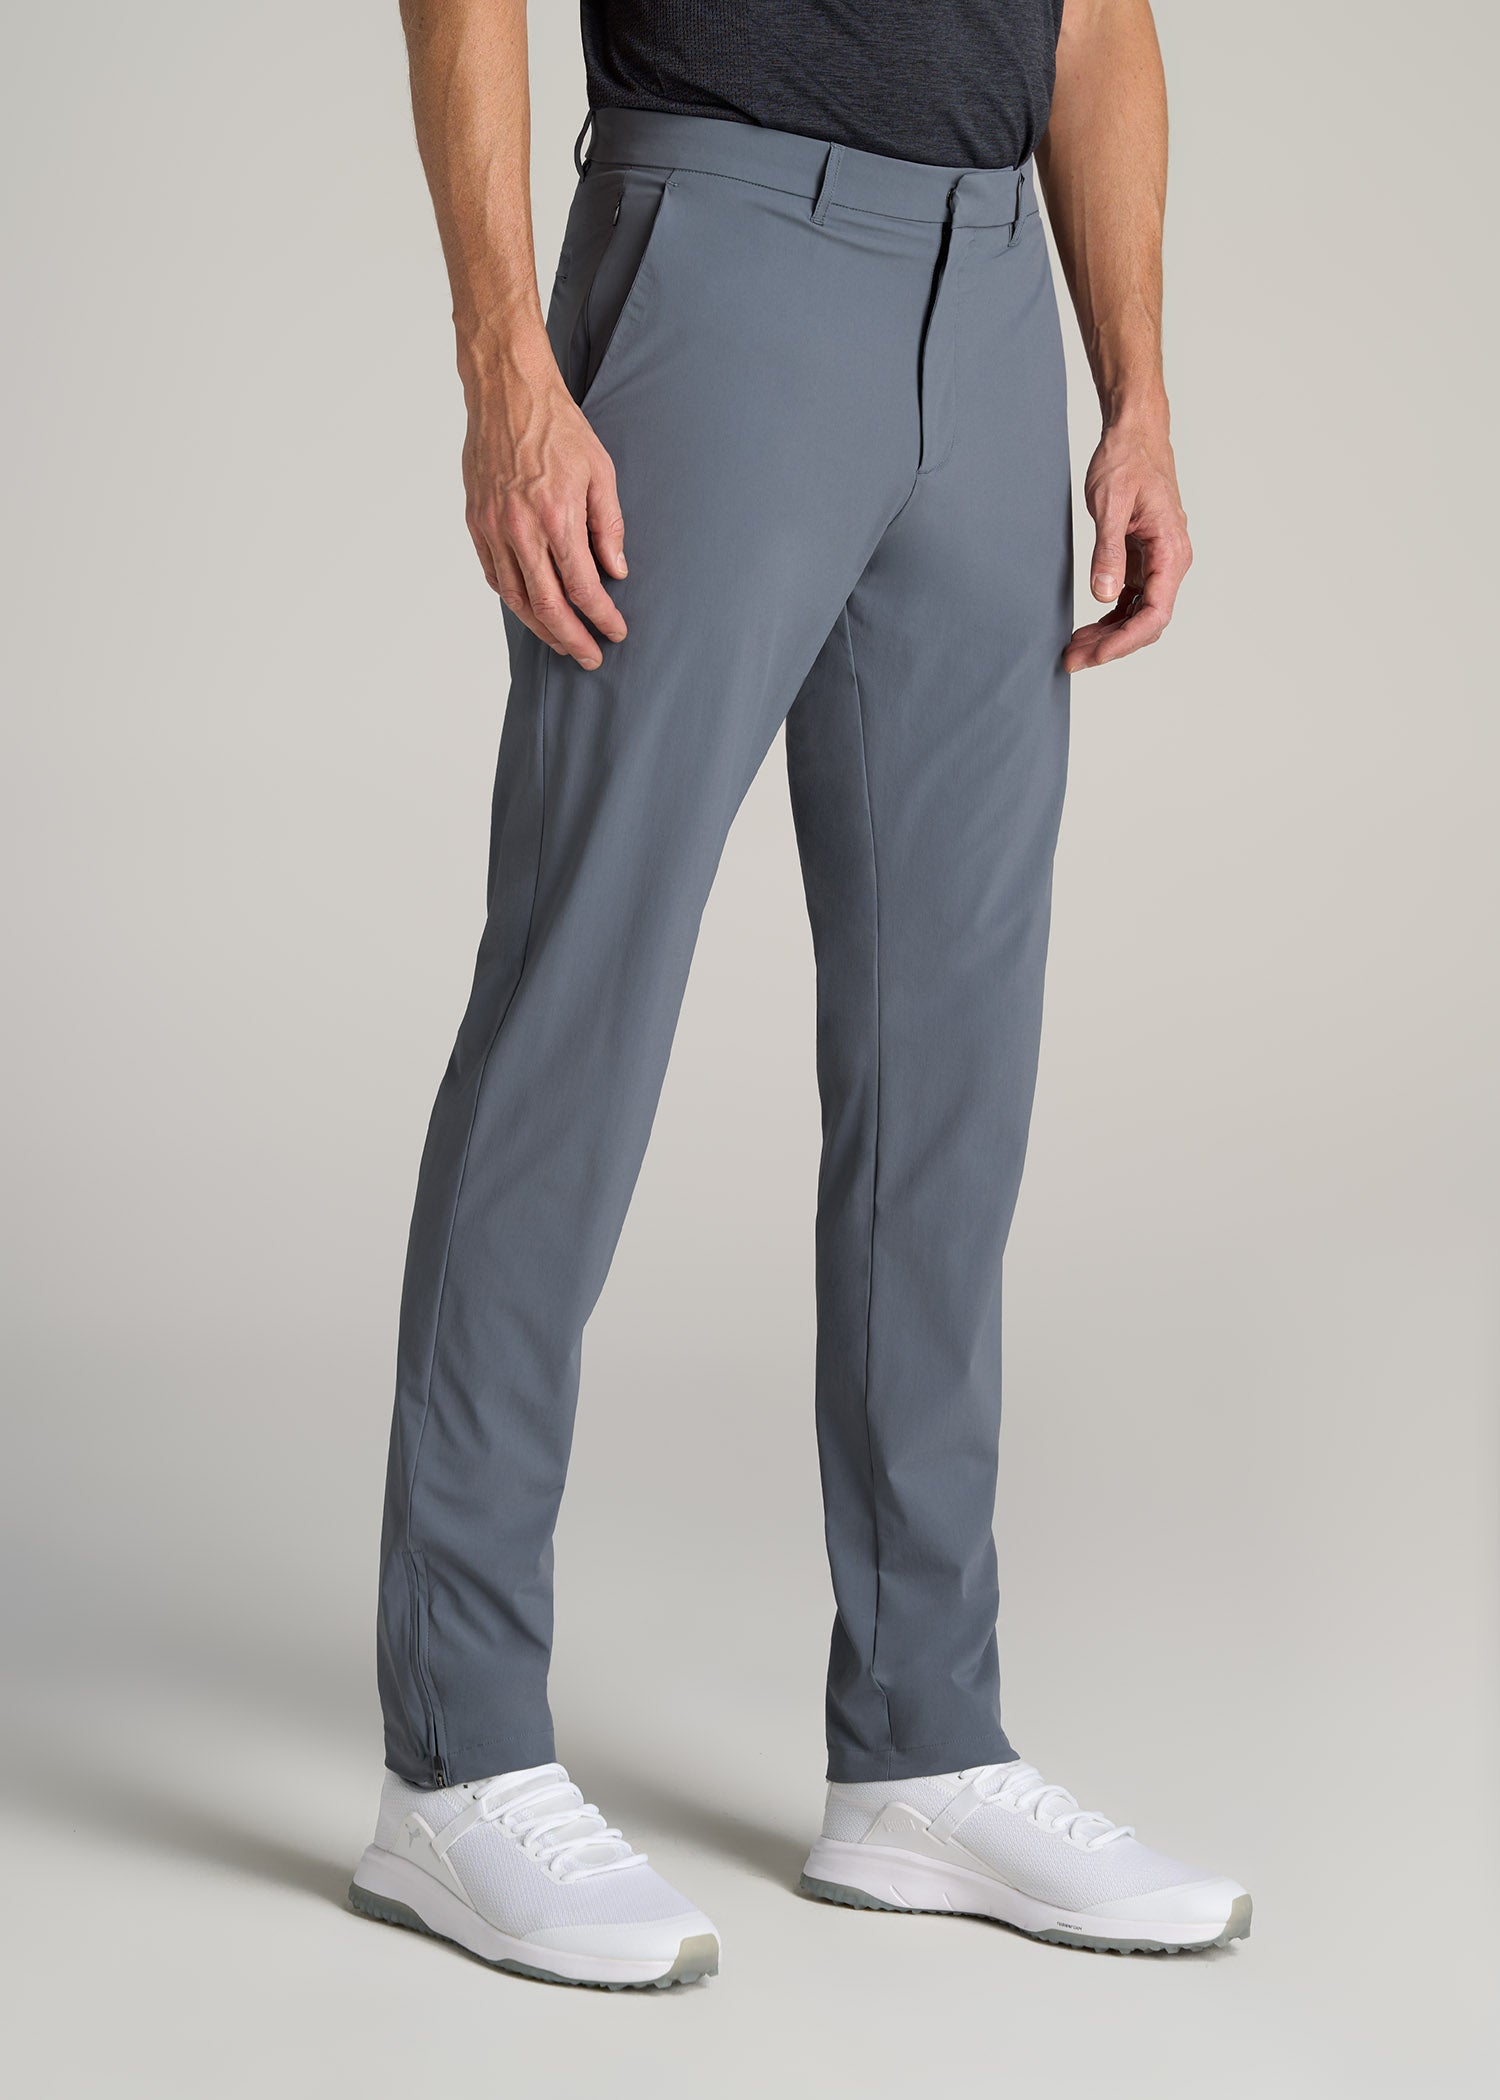 Performance TAPERED-FIT Chino Pants for Tall Men in Smoky Blue